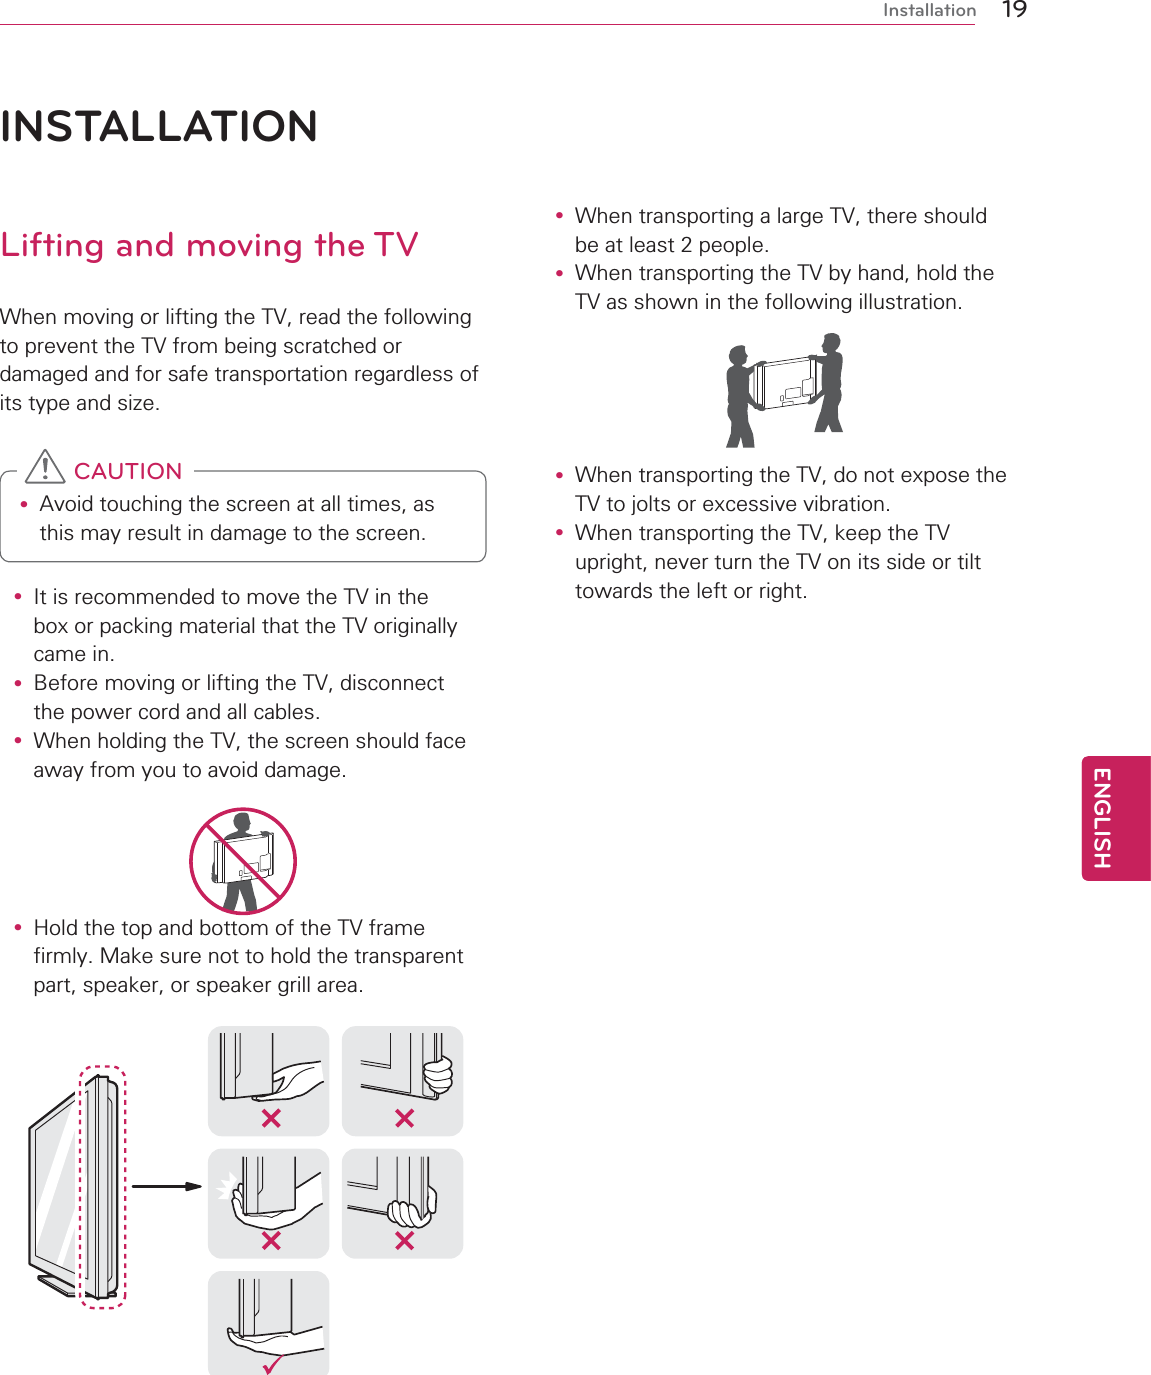 19ENGENGLISHInstallationINSTALLATIONLifting and moving the TVWhen moving or lifting the TV, read the following to prevent the TV from being scratched or damaged and for safe transportation regardless of its type and size.y Avoid touching the screen at all times, as this may result in damage to the screen.  CAUTIONy It is recommended to move the TV in the box or packing material that the TV originally came in.y Before moving or lifting the TV, disconnect the power cord and all cables.y When holding the TV, the screen should face away from you to avoid damage.y Hold the top and bottom of the TV frame firmly. Make sure not to hold the transparent part, speaker, or speaker grill area.y When transporting a large TV, there should be at least 2 people.y When transporting the TV by hand, hold the TV as shown in the following illustration.y When transporting the TV, do not expose the TV to jolts or excessive vibration.y When transporting the TV, keep the TV upright, never turn the TV on its side or tilt towards the left or right.